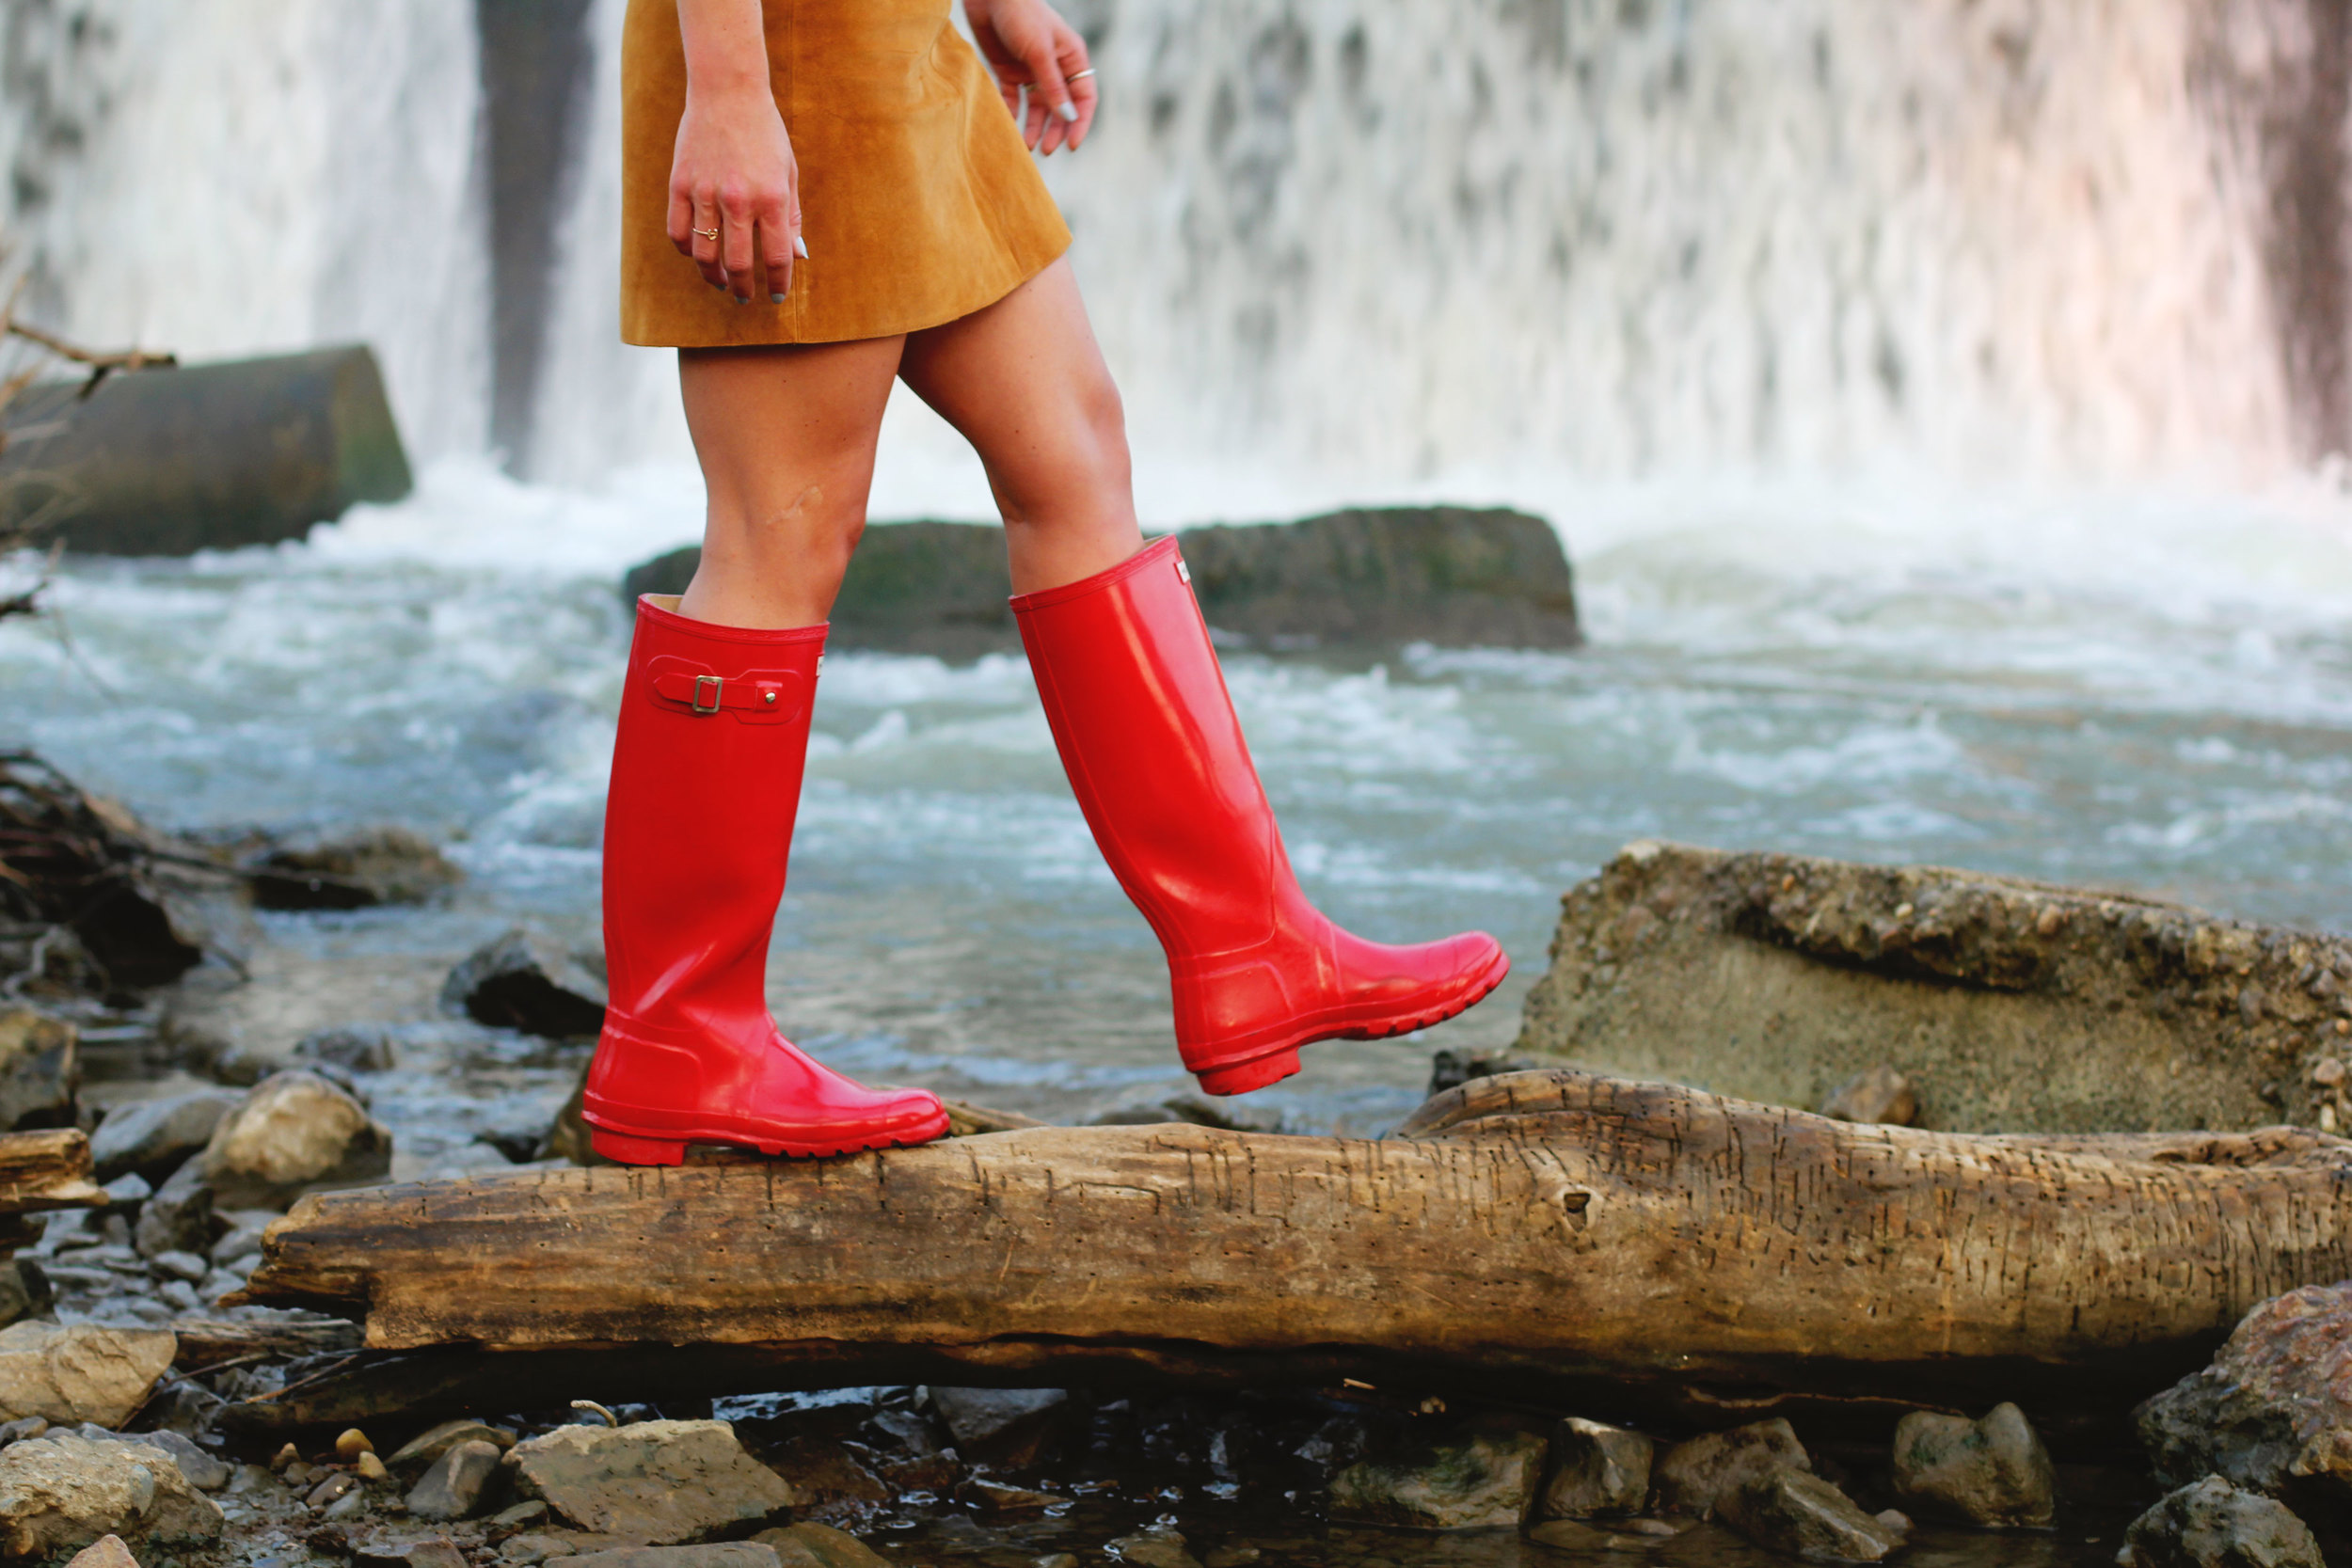 Fashion Adventures at the Falls of The Ohio: MINKPINK Cropped Sweatshirt, Suede Mini Skirt, Red HUNTER Boots, Fall Style